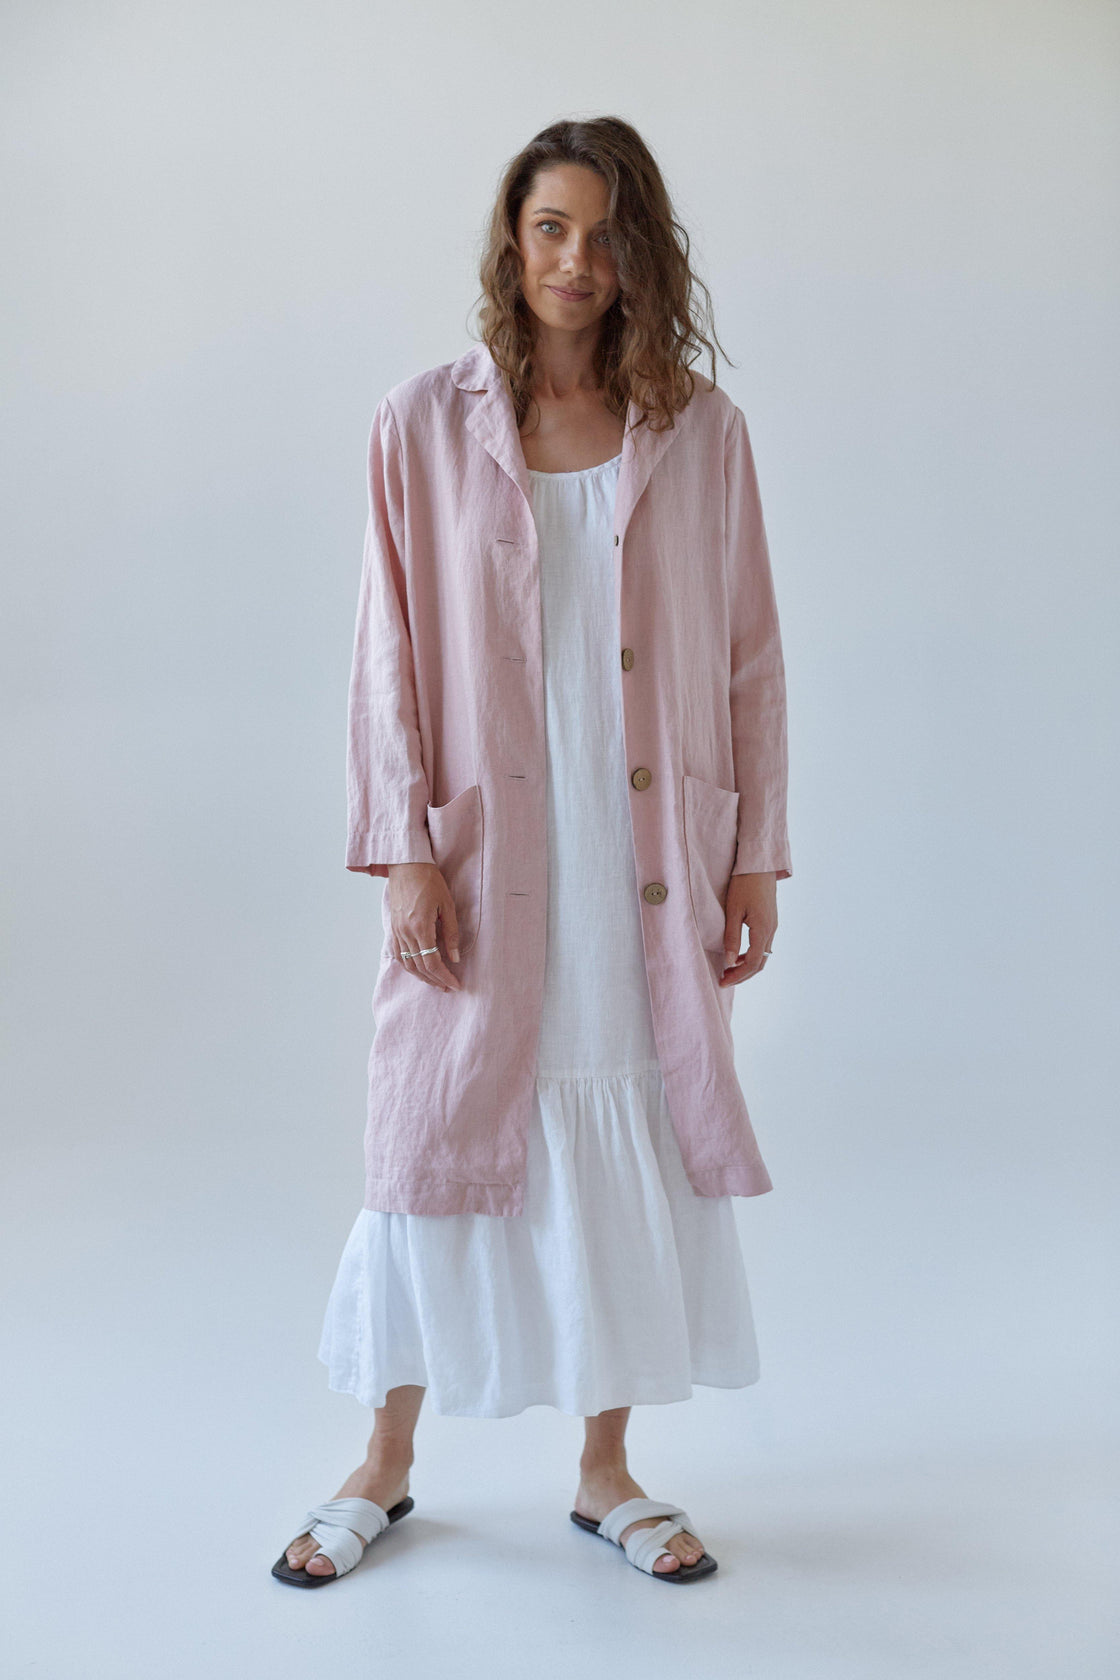 Pink linen duster coat with white dress - Manufacture de Lin